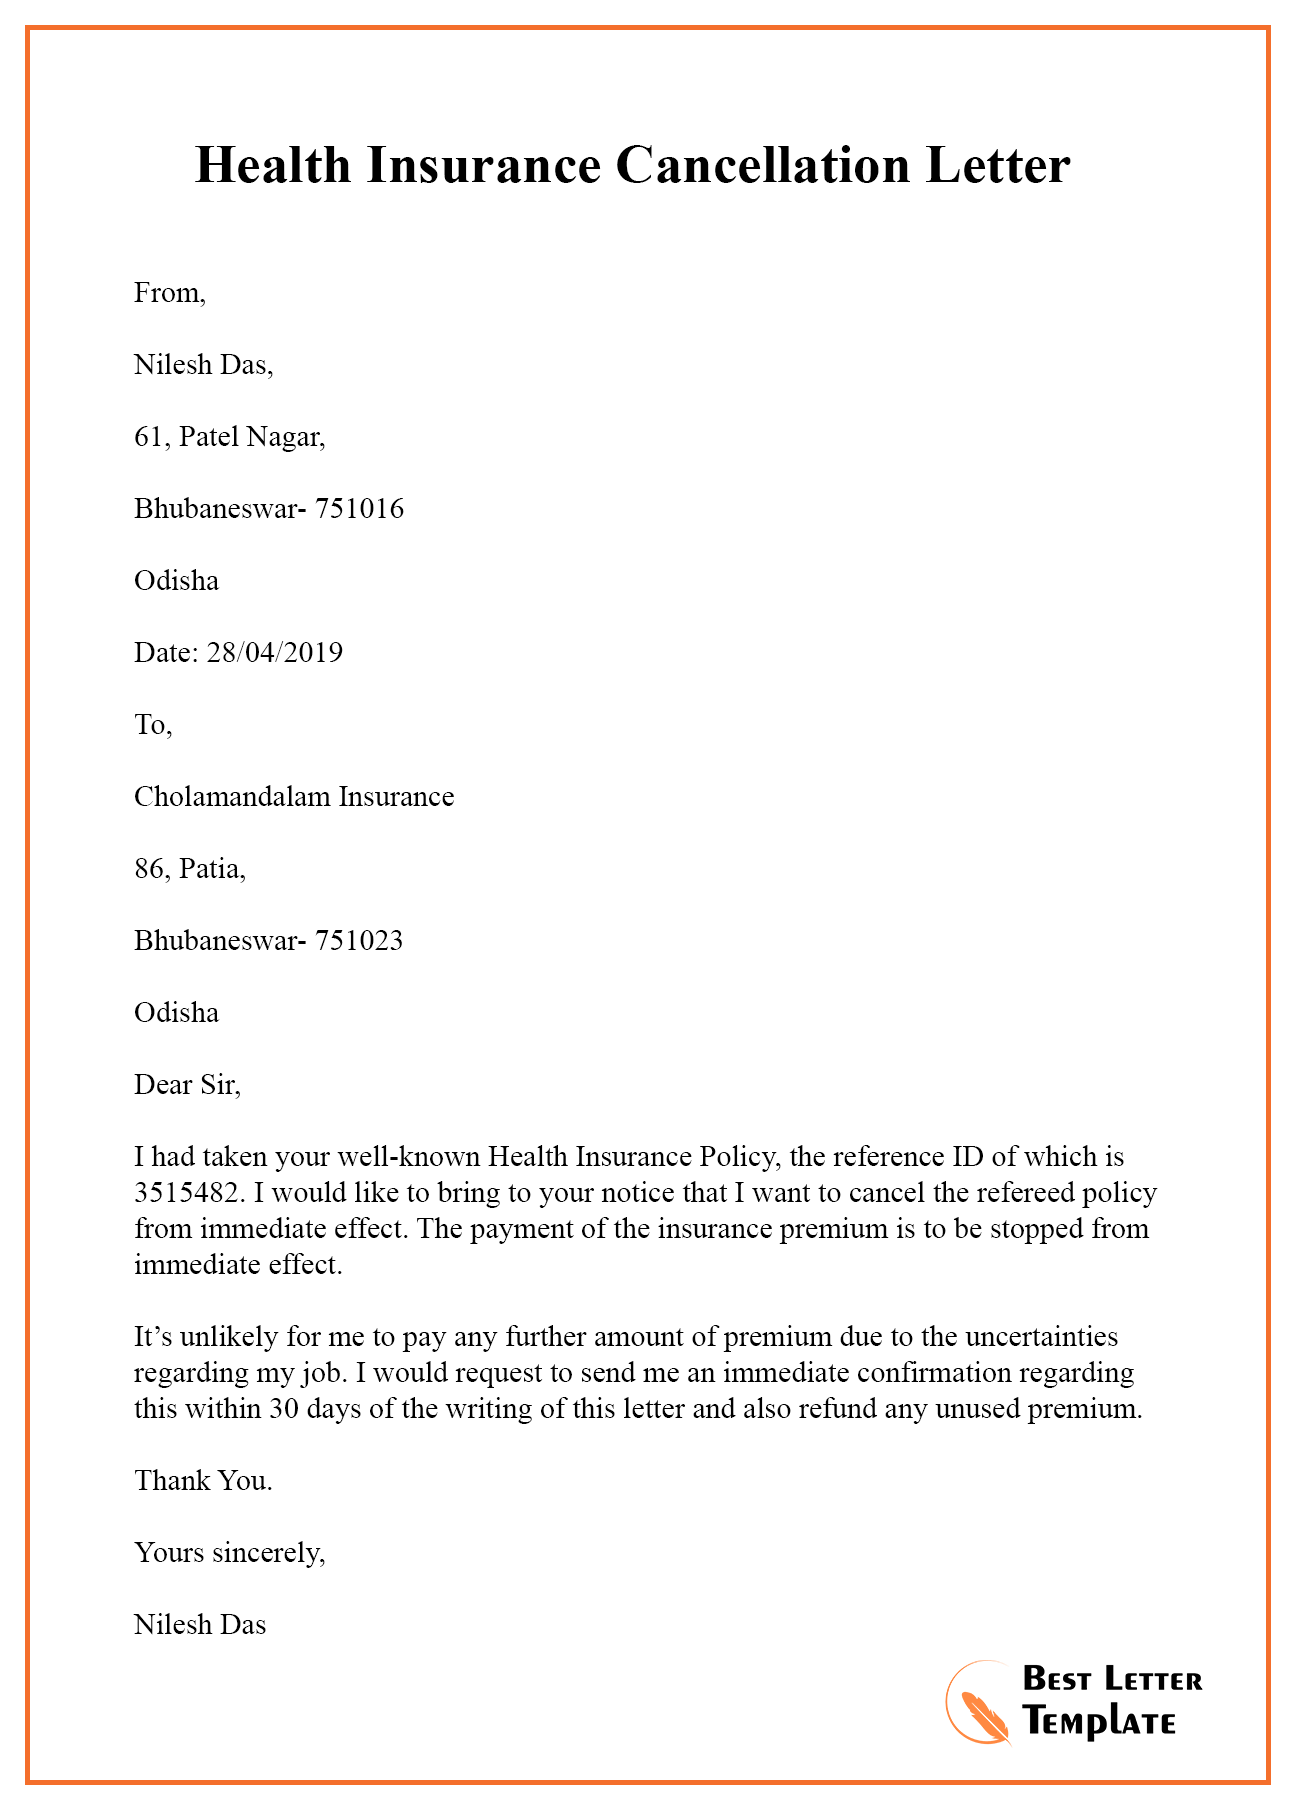 Insurance Cancellation Letter Template - Format Sample & Example (2022)